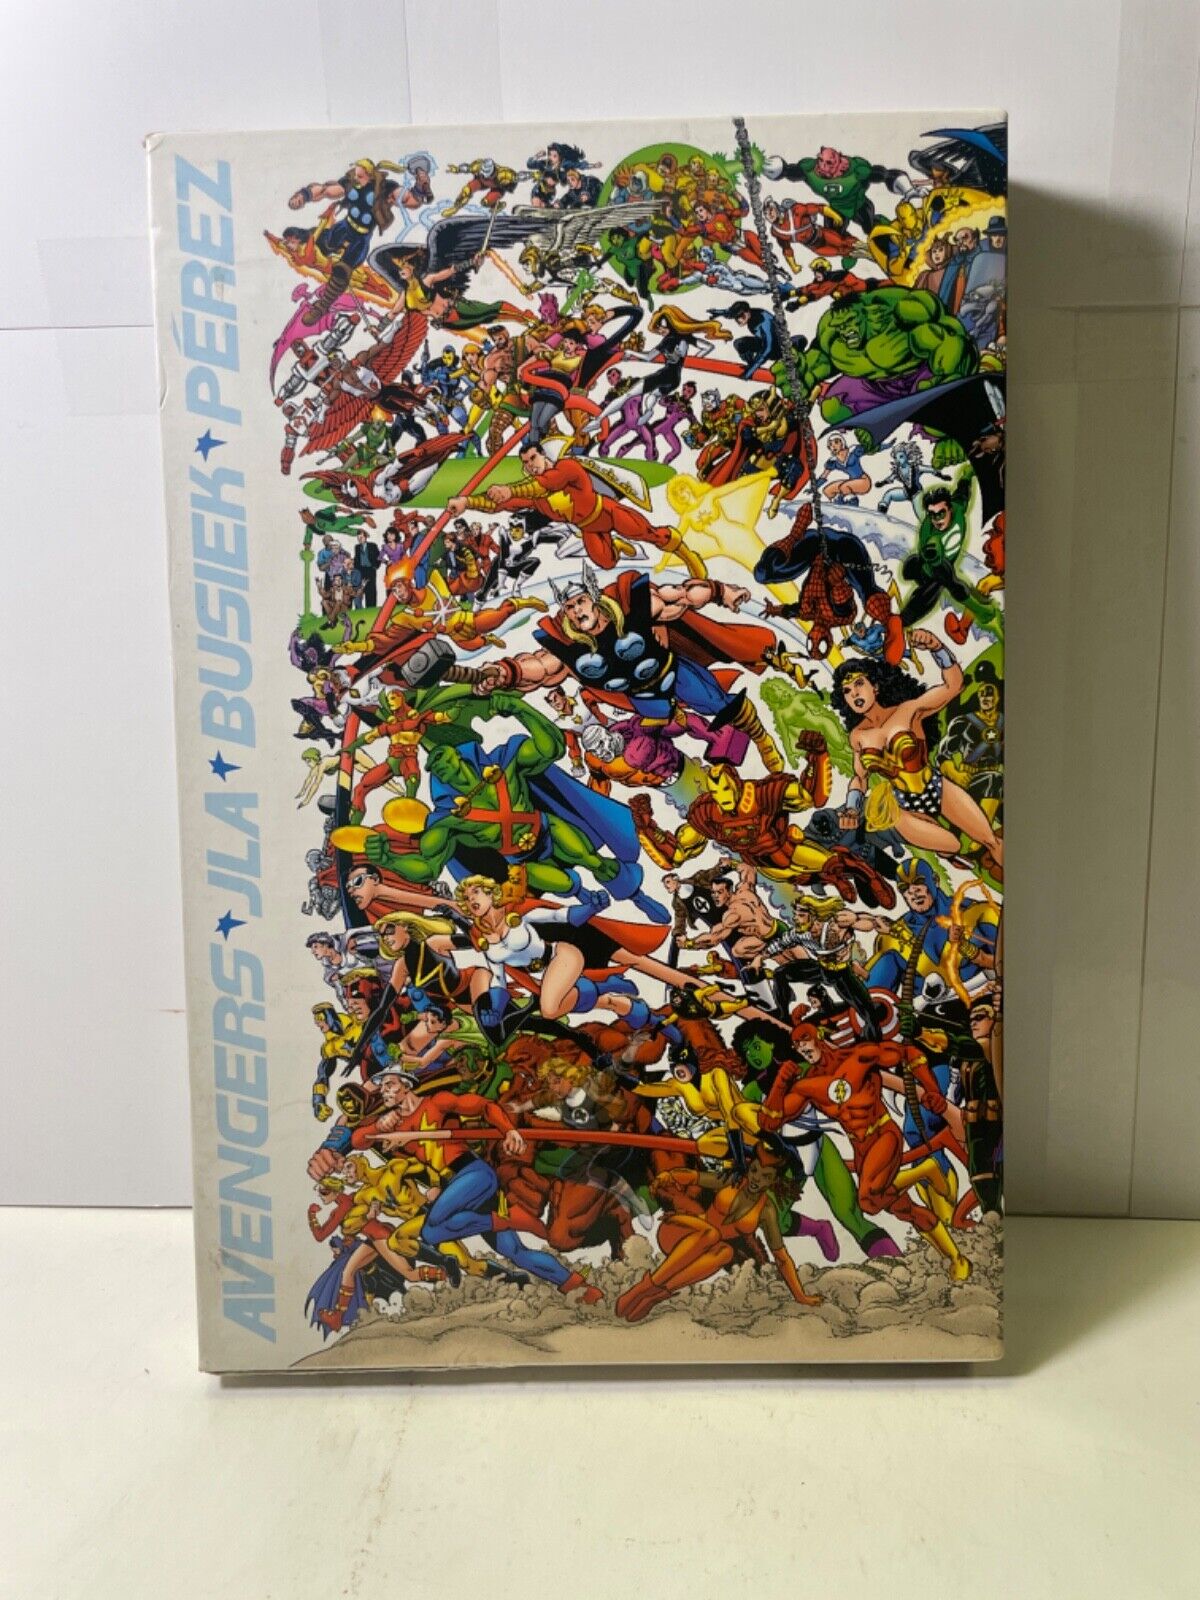 JLA Avengers Collectors Edition Oversized Hardcover/Slipcover